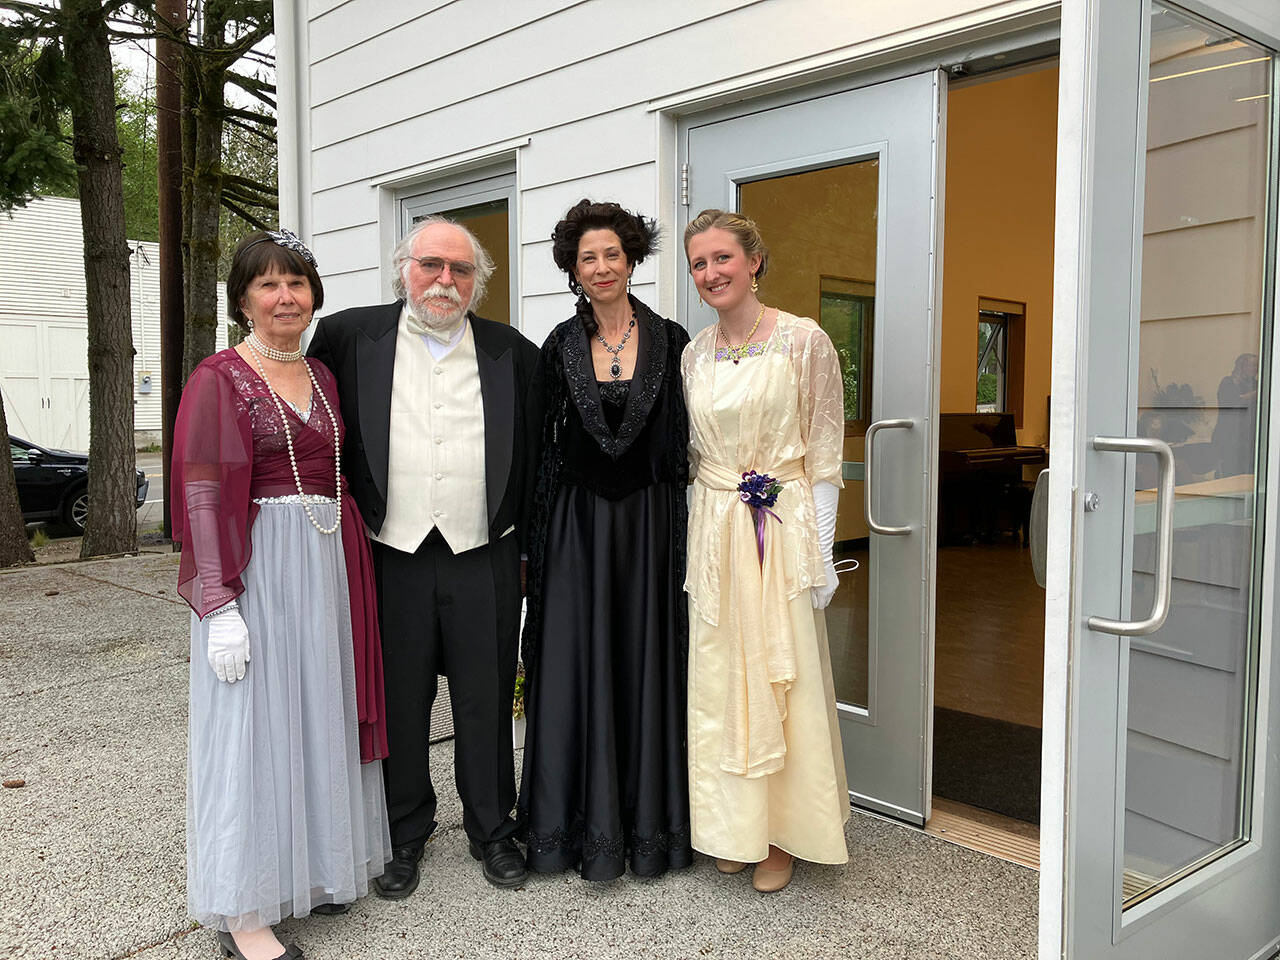 (Elizabeth Shepherd Photo) Vashon Opera singers ‘The Merry Widow’ take in the evening air, outside of Vashon Center for the Arts’ green room, prior to one of the final rehearsals of “The Merry Widow.” Pictured left to right are Carol Butler, George Butler, Jennifer Krikawa and Emily Morse.